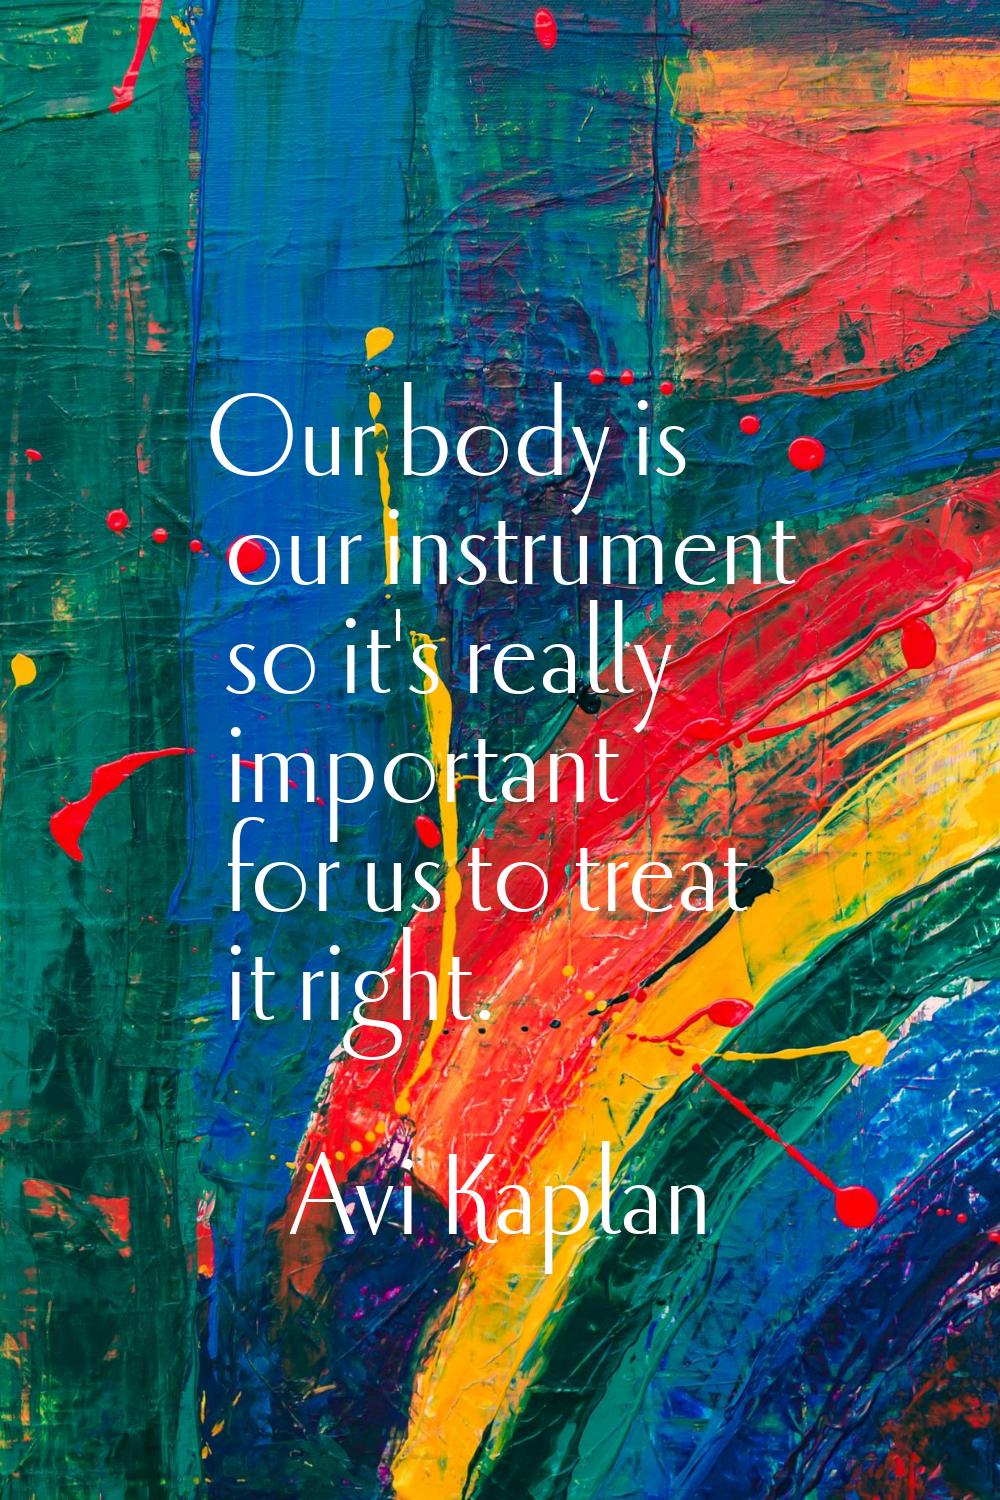 Our body is our instrument so it's really important for us to treat it right.